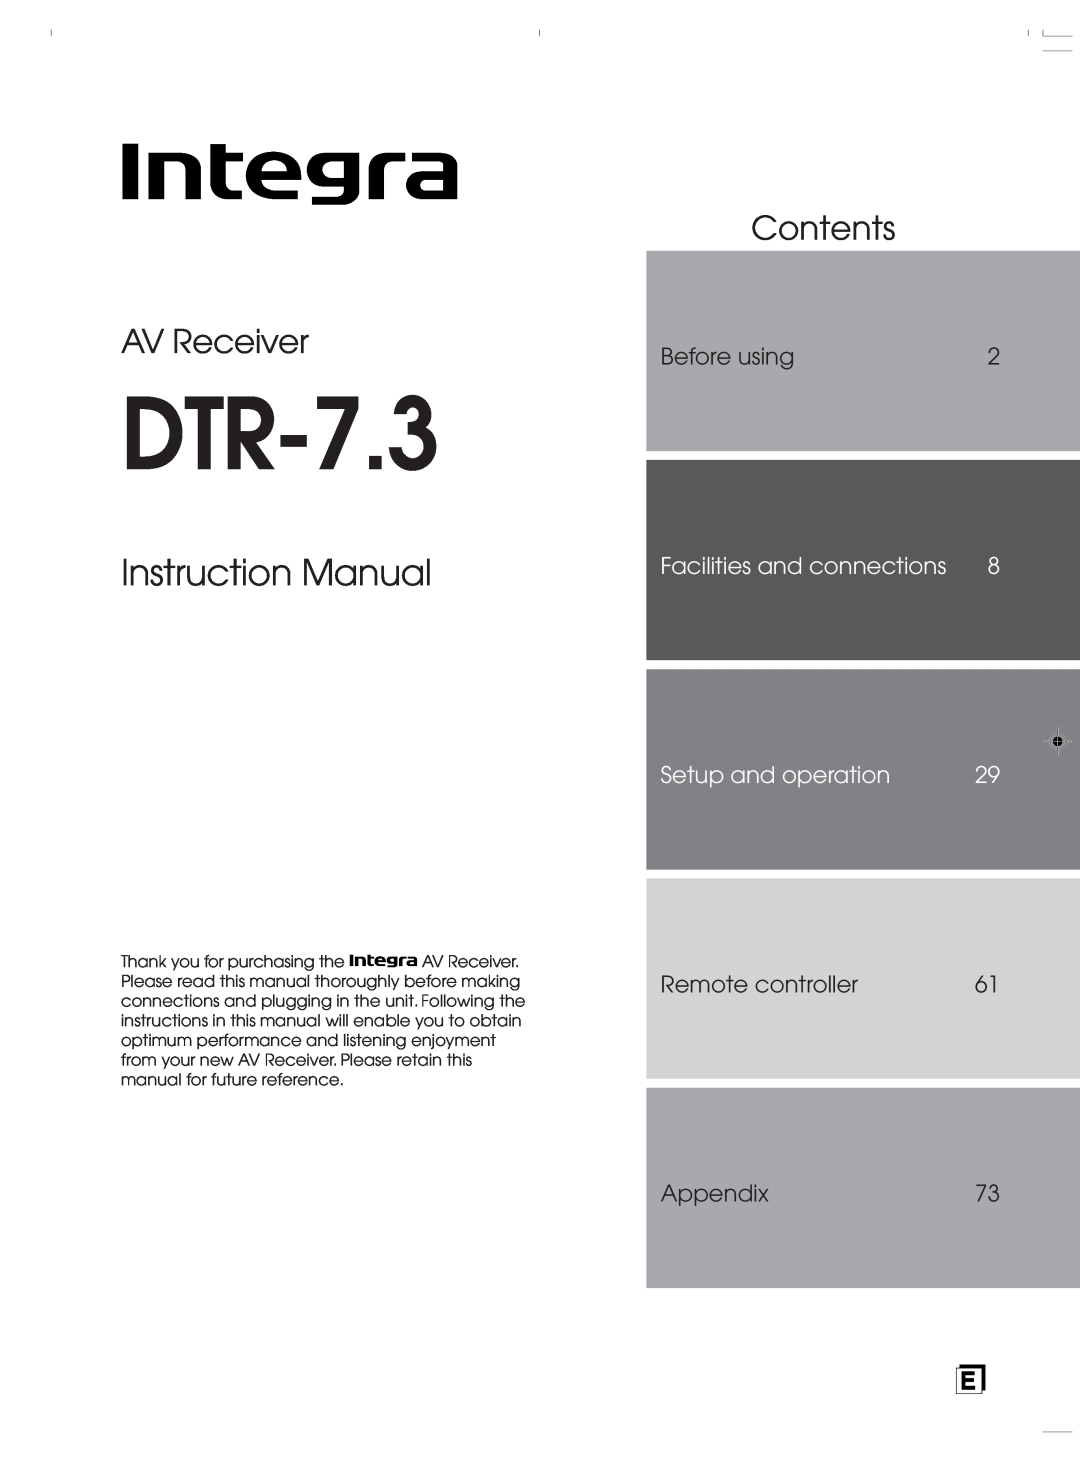 Integra DTR-7.3 instruction manual Instruction Manual, AV Receiver, Contents, Before using, Facilities and connections 